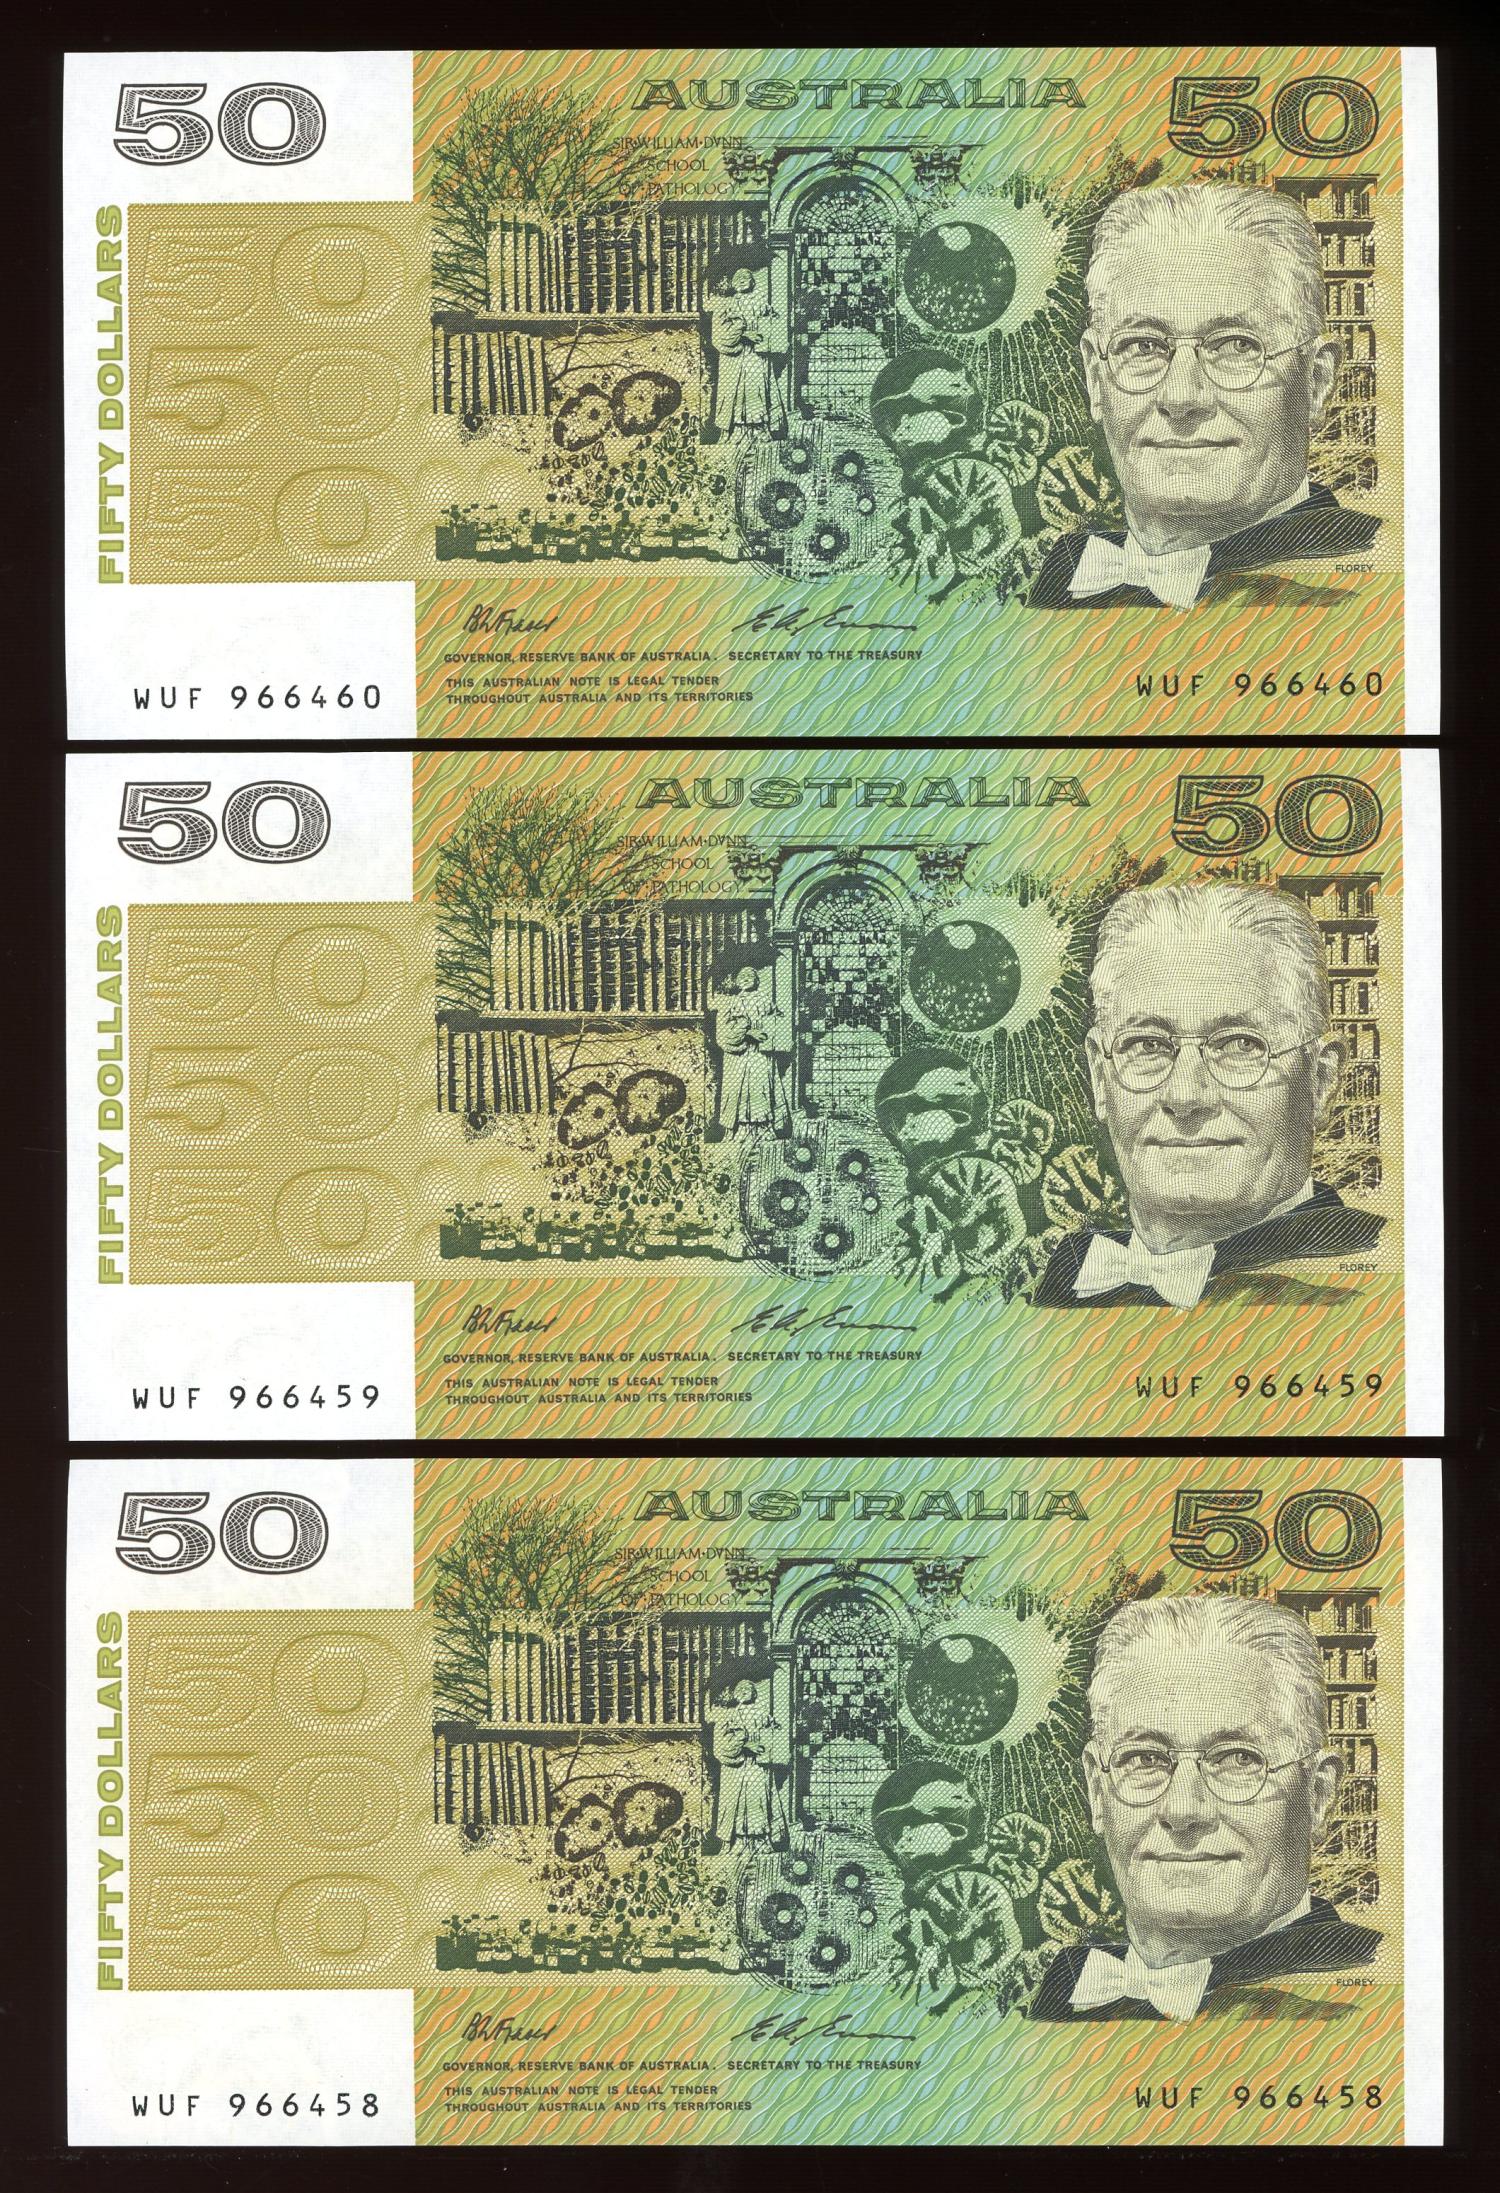 Thumbnail for 1993 Consecutive Trio of $50 Fraser Evans WUF 966458-60 UNC